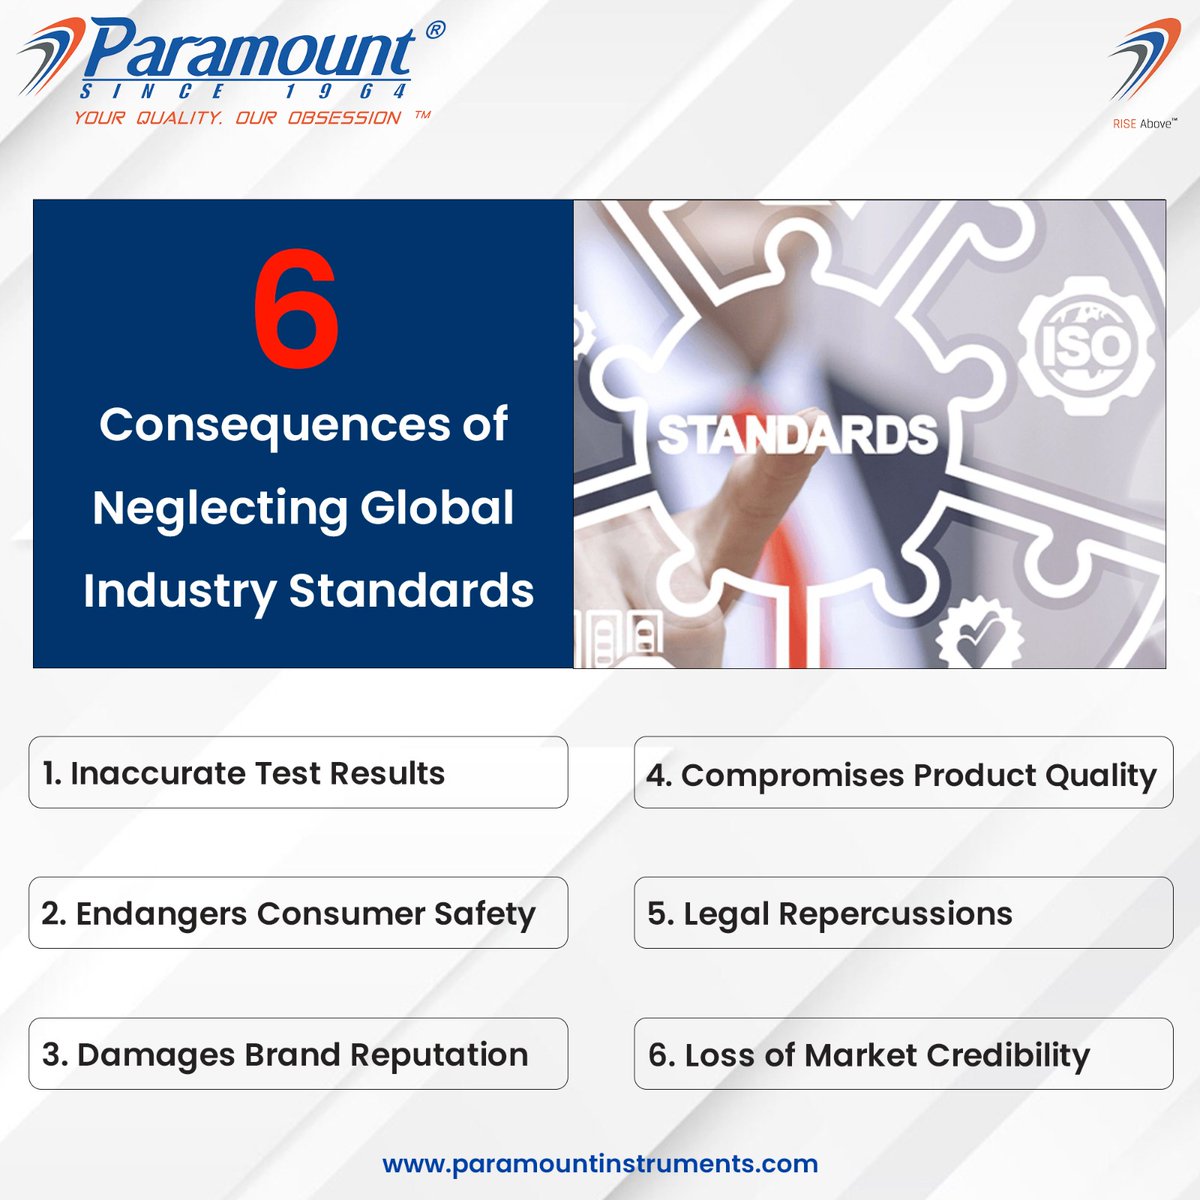 Compliance with Globally Recognized, Rigorous Industry Standards ensures that end-products are crafted with Unmatched Precision. Failure to adhere to these standards can lead to Serious Repercussions, as outlined below.
#ParamountInstruments #QualityMatters #IndustryStandards